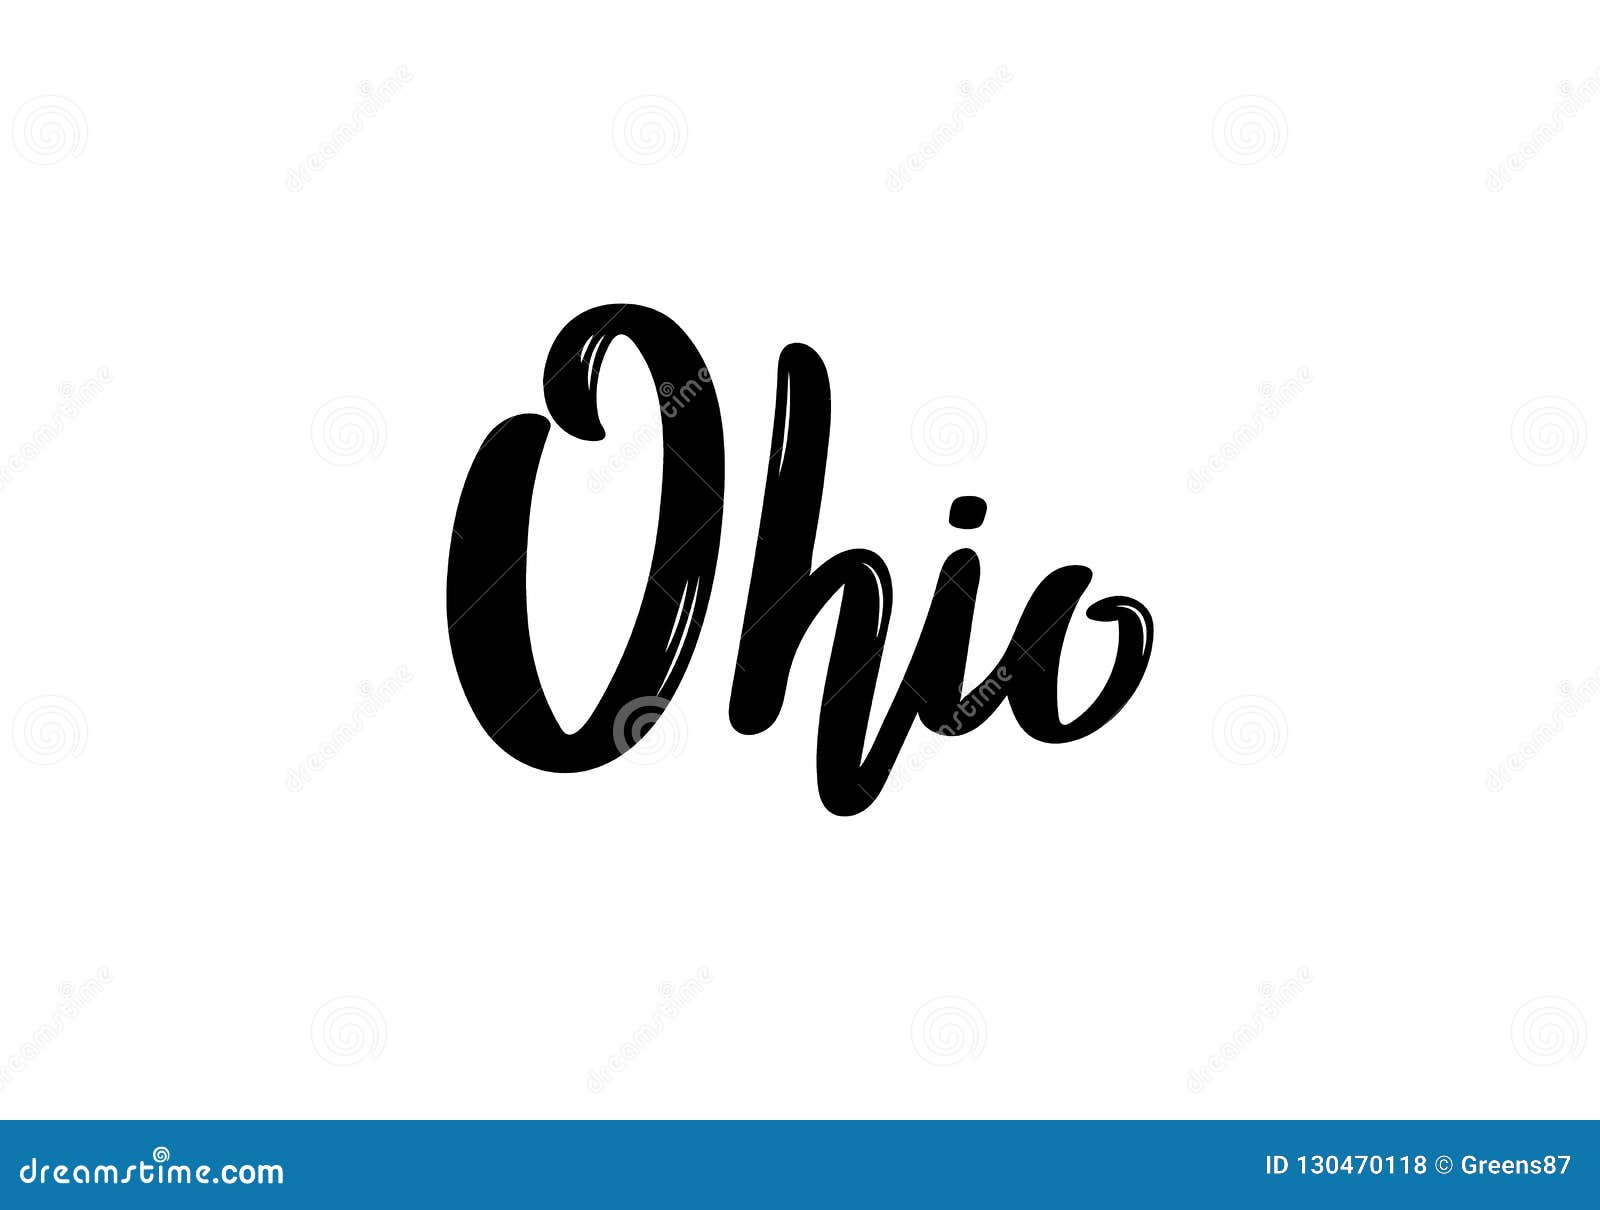 Who are the Best Ohio Tattoo Artists  Top Shops Near Me